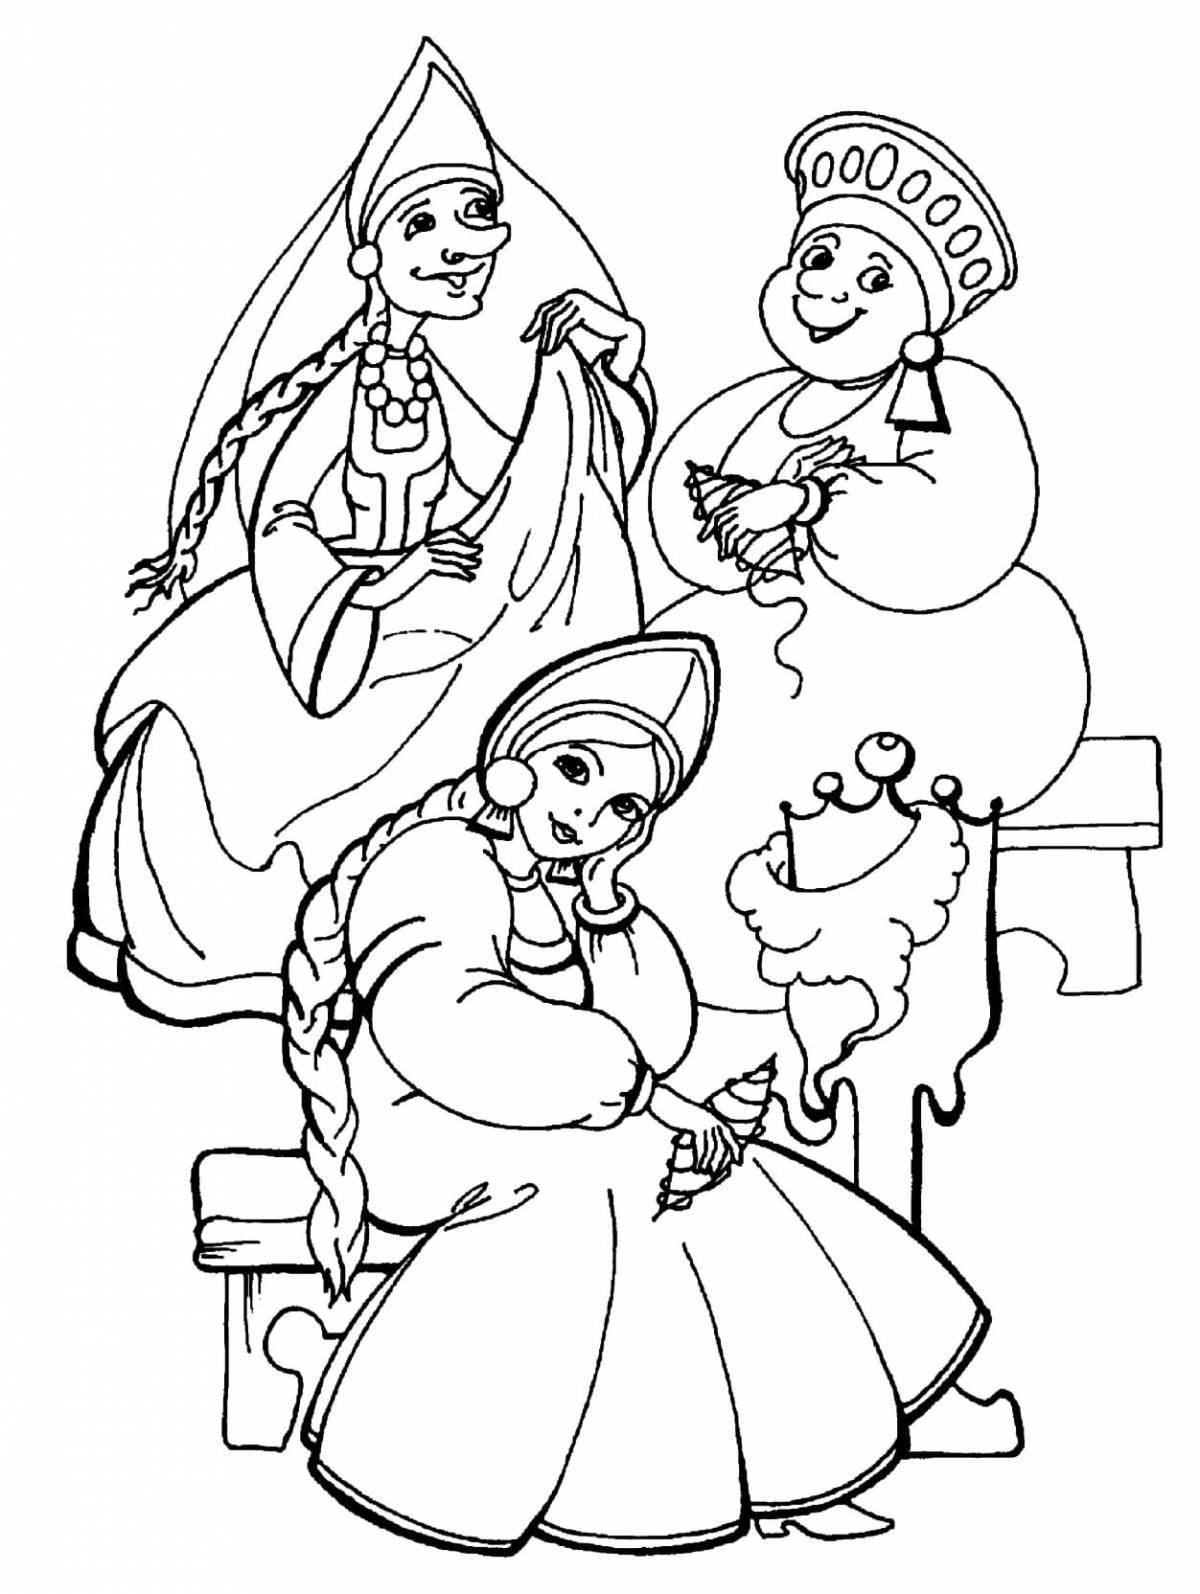 Magic coloring book based on Pushkin's fairy tales for preschoolers